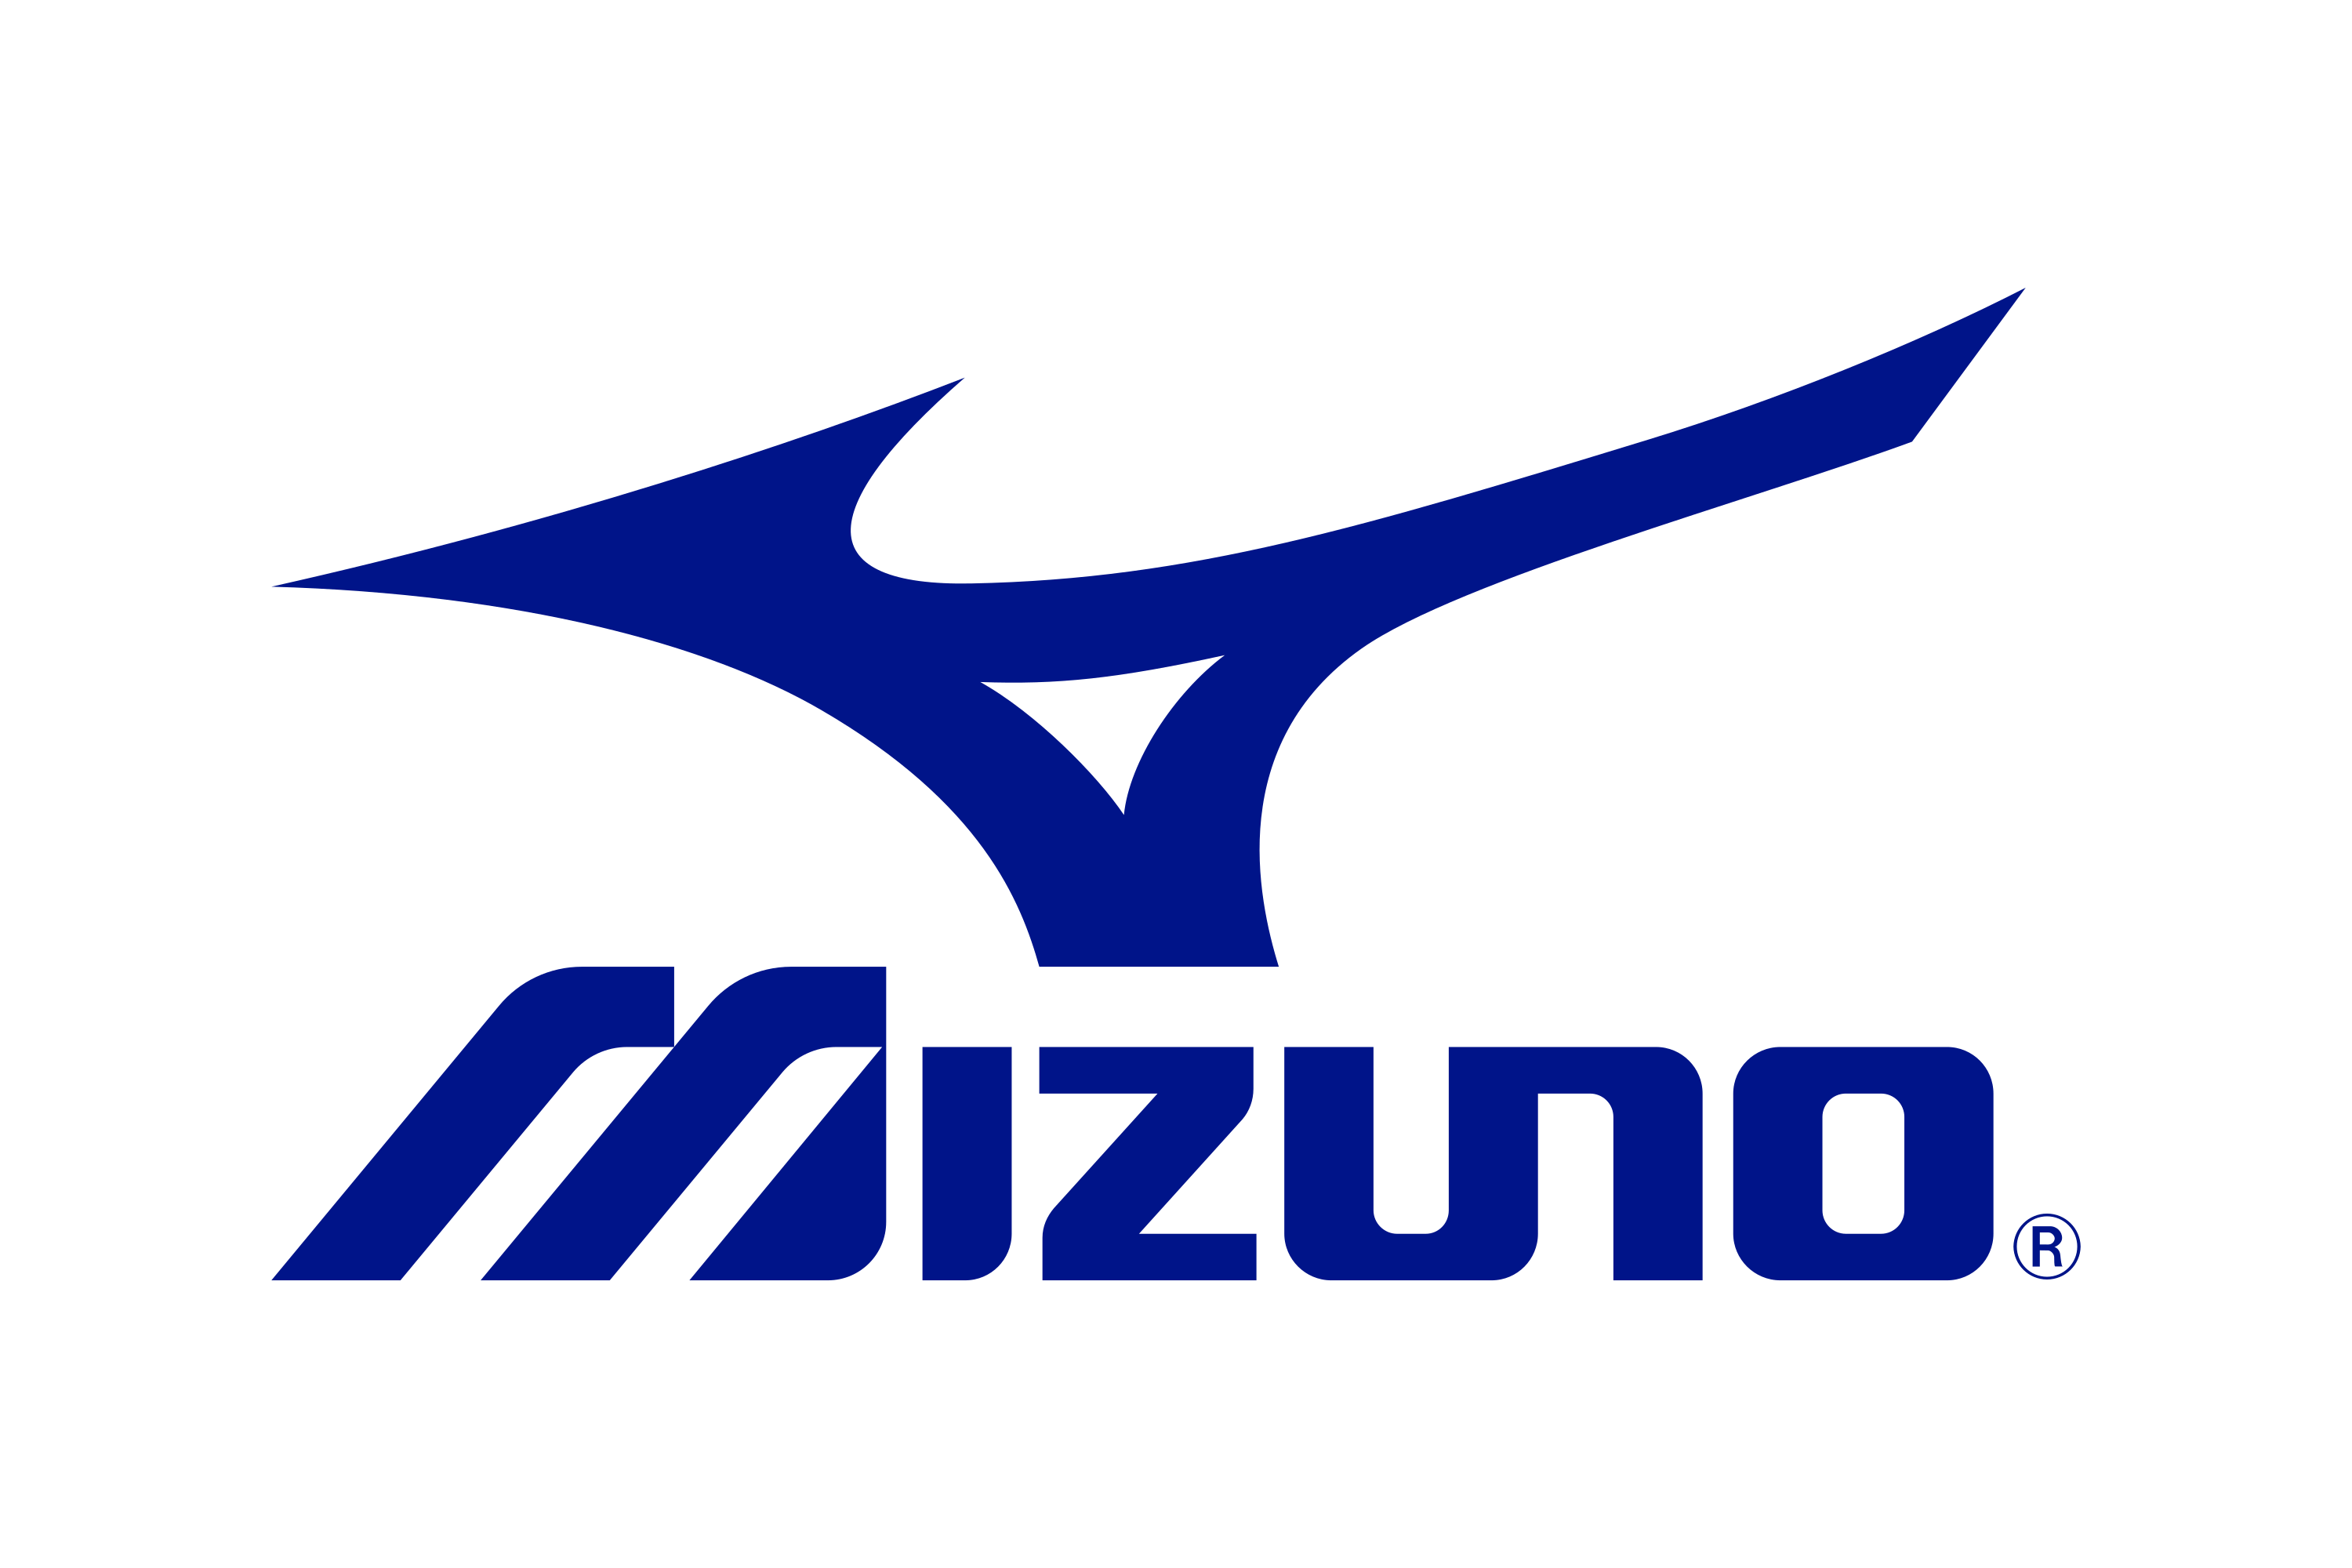 Download Mizuno Corporation Logo in SVG Vector or PNG File Format